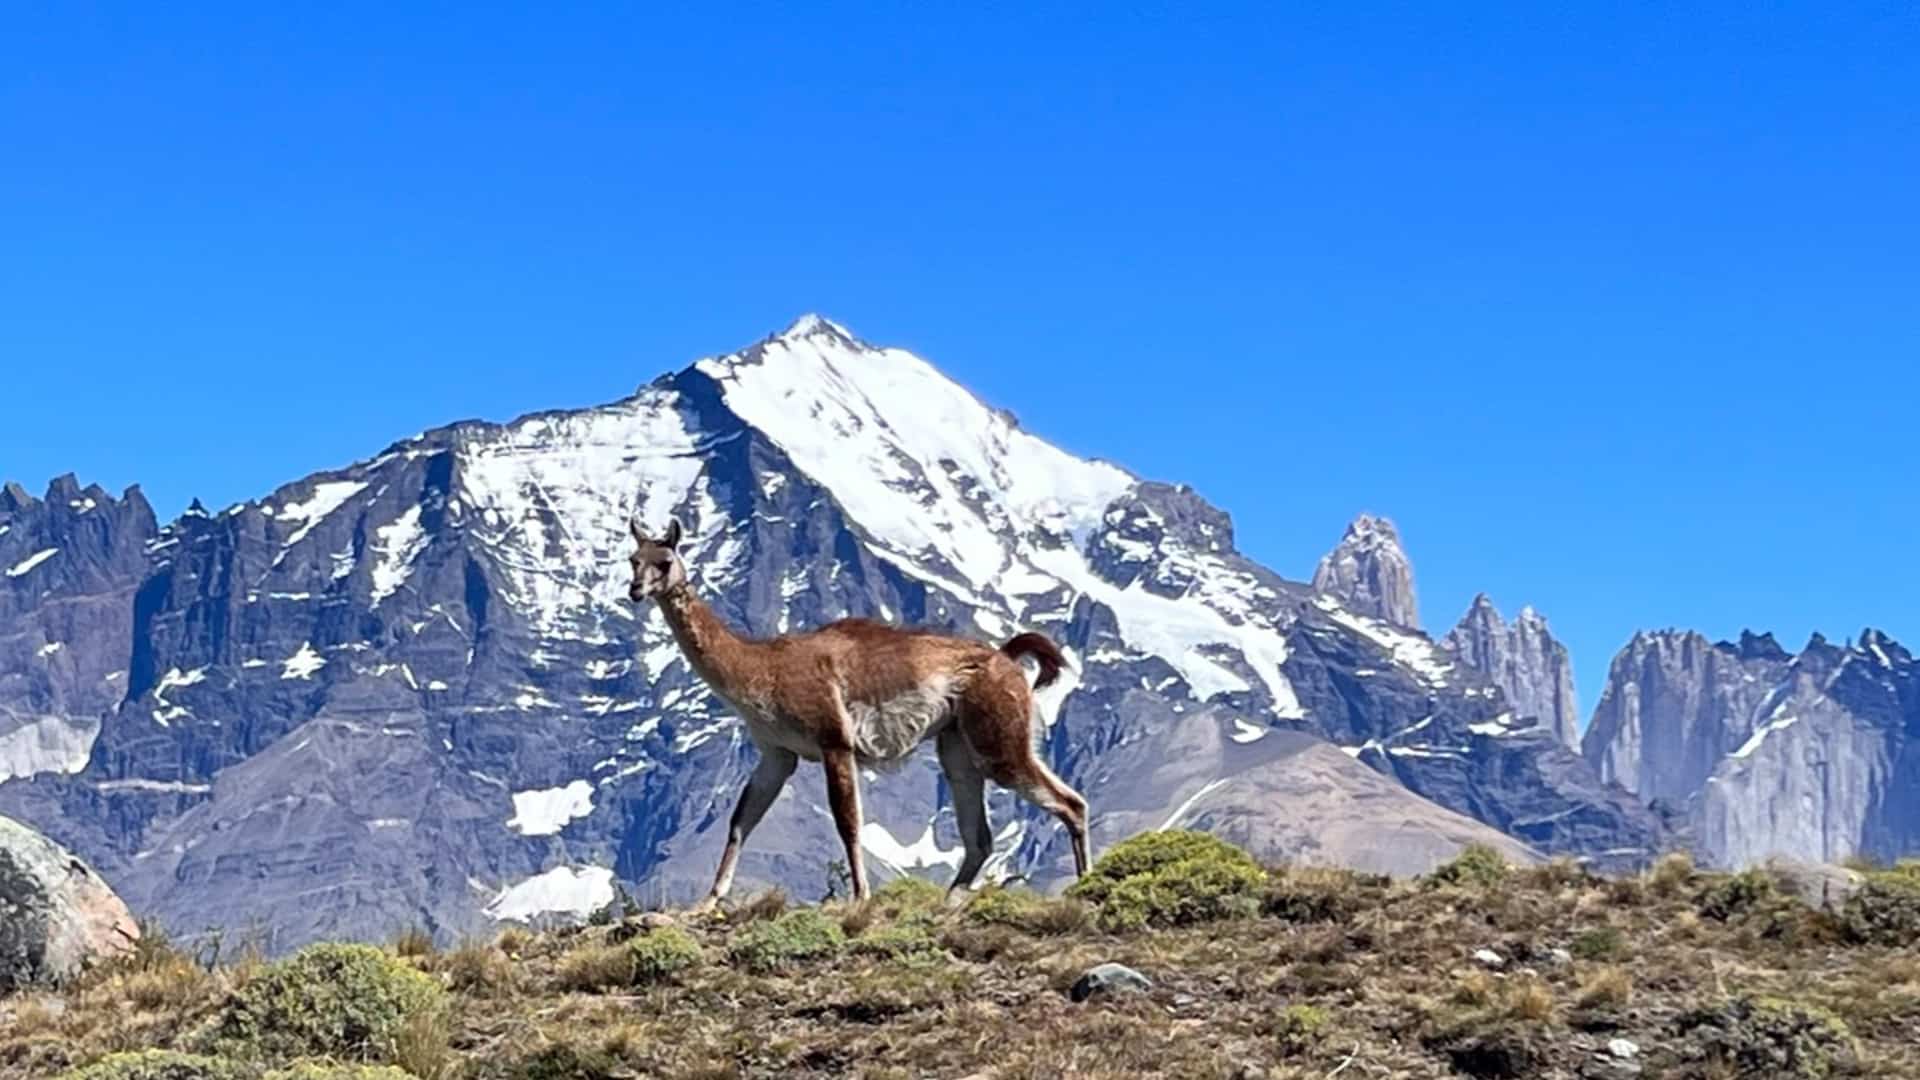 Guanaco on a hill with glaciers in the background